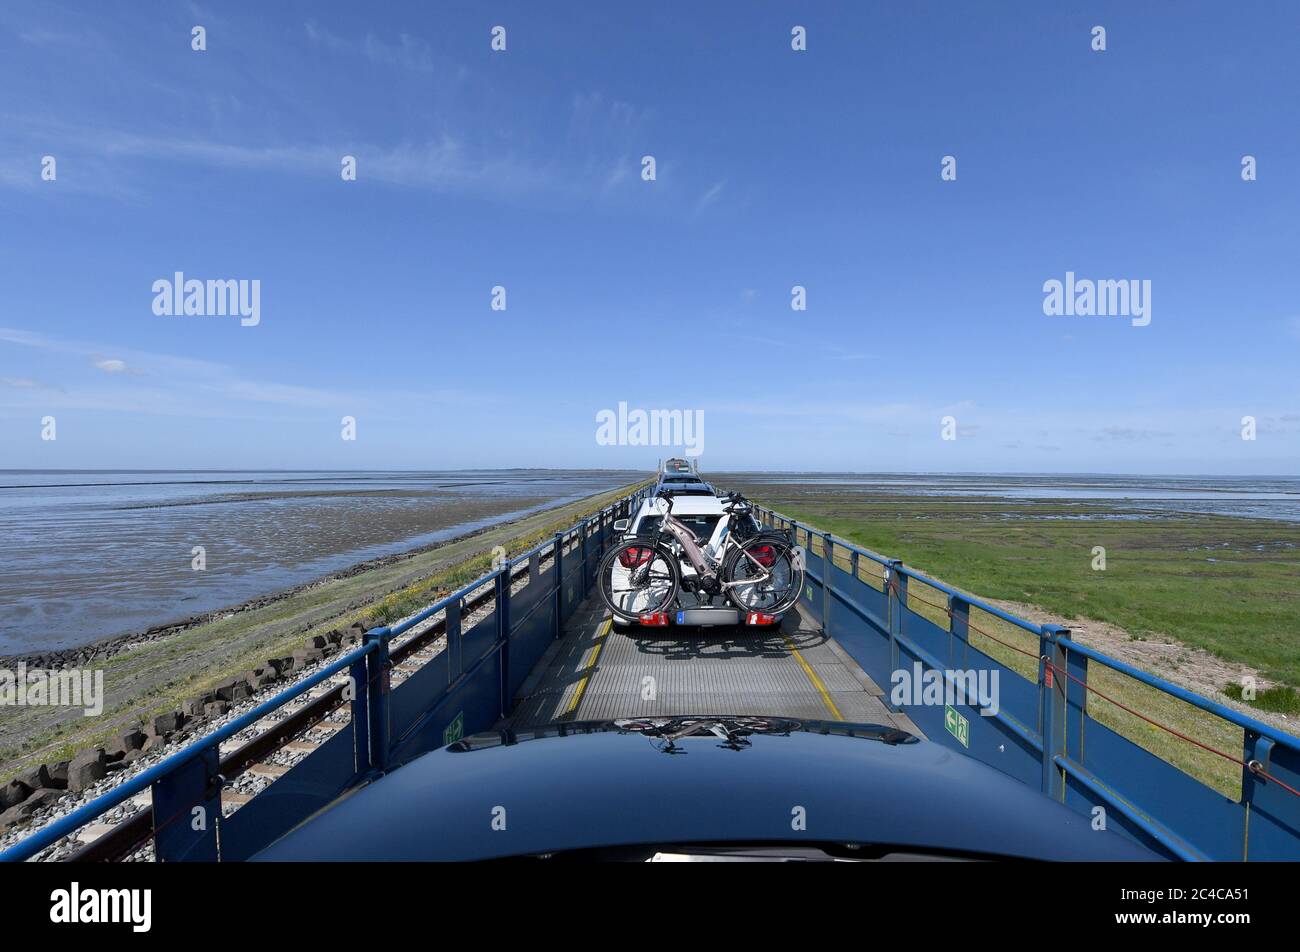 Sylt, Germany. 23rd June, 2020. Cars travel on the Auto Train in the direction of Sylt. (to dpa 'The people are euphoric' - holidays on Sylt in times of Corona') Credit: Carsten Rehder/dpa - ATTENTION: License plate was made unrecognizable/dpa/Alamy Live News Stock Photo